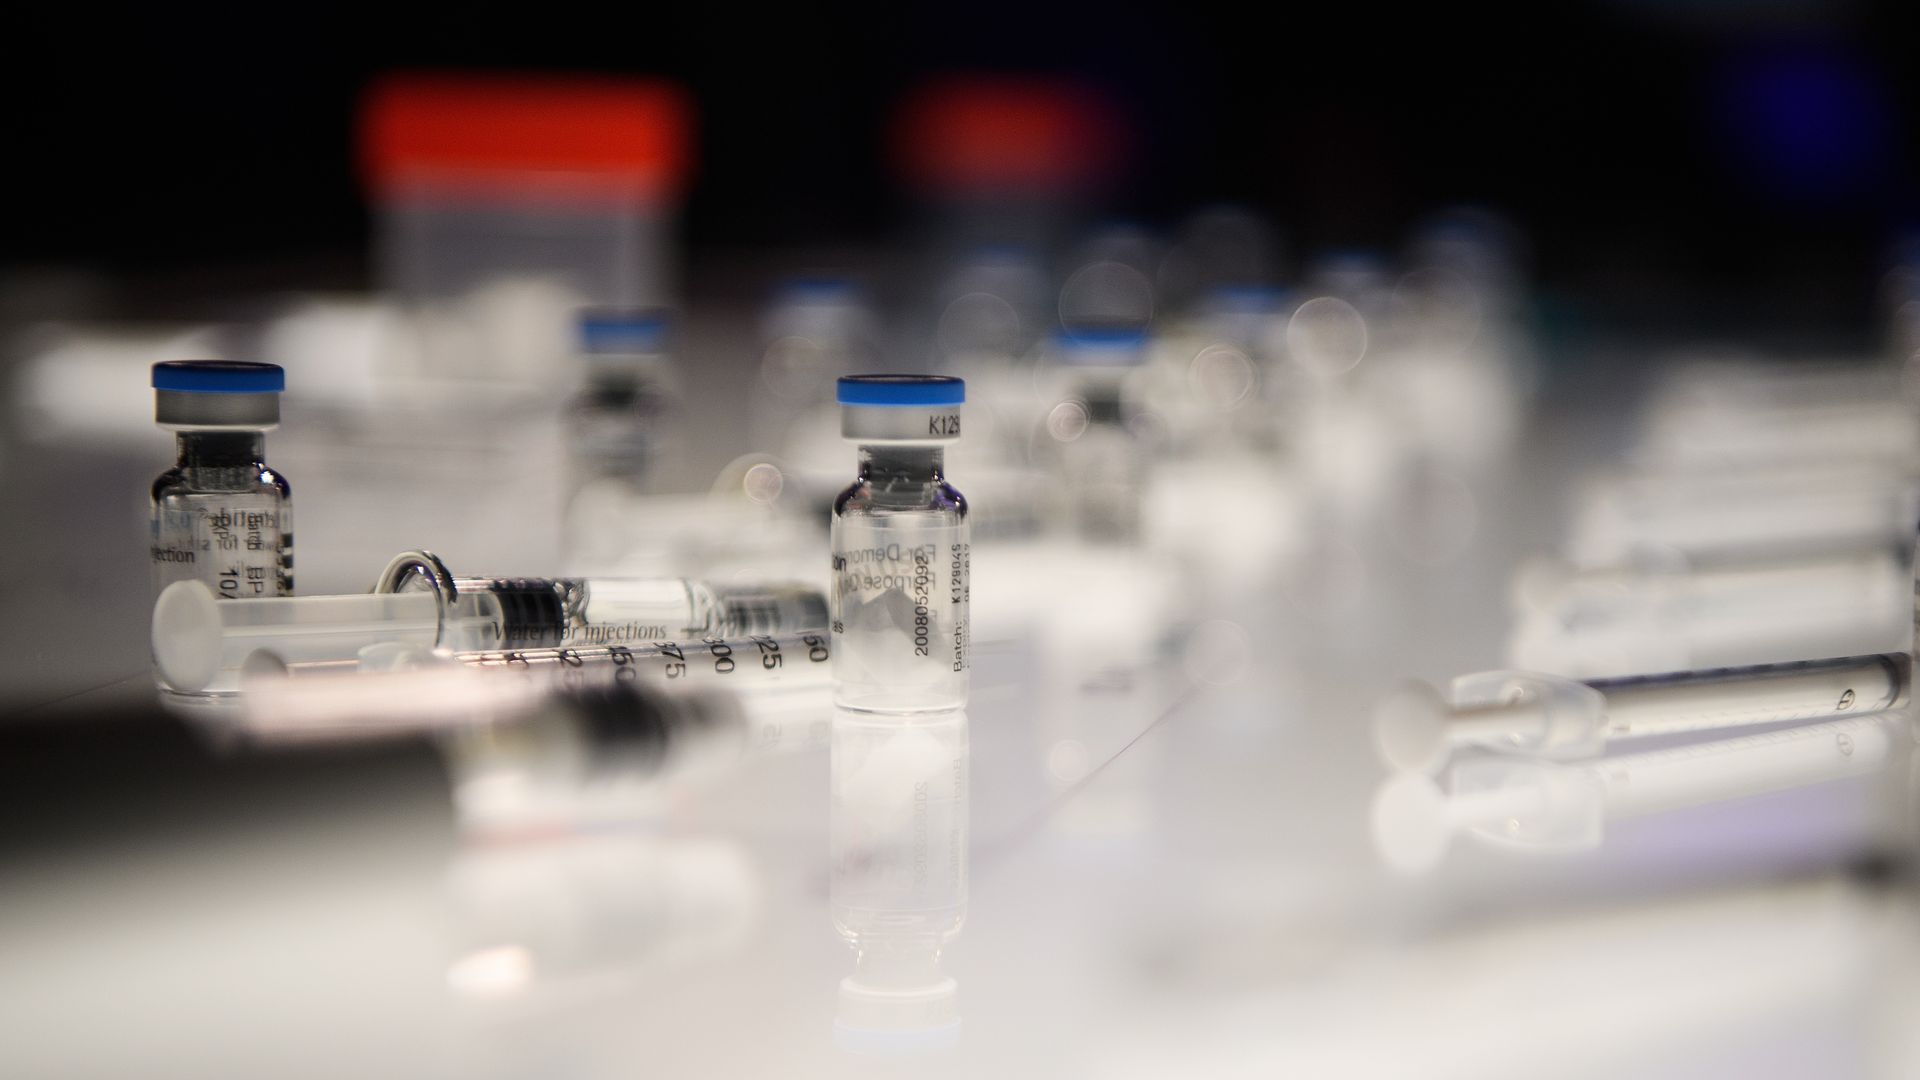 Vials and syringes in a lab